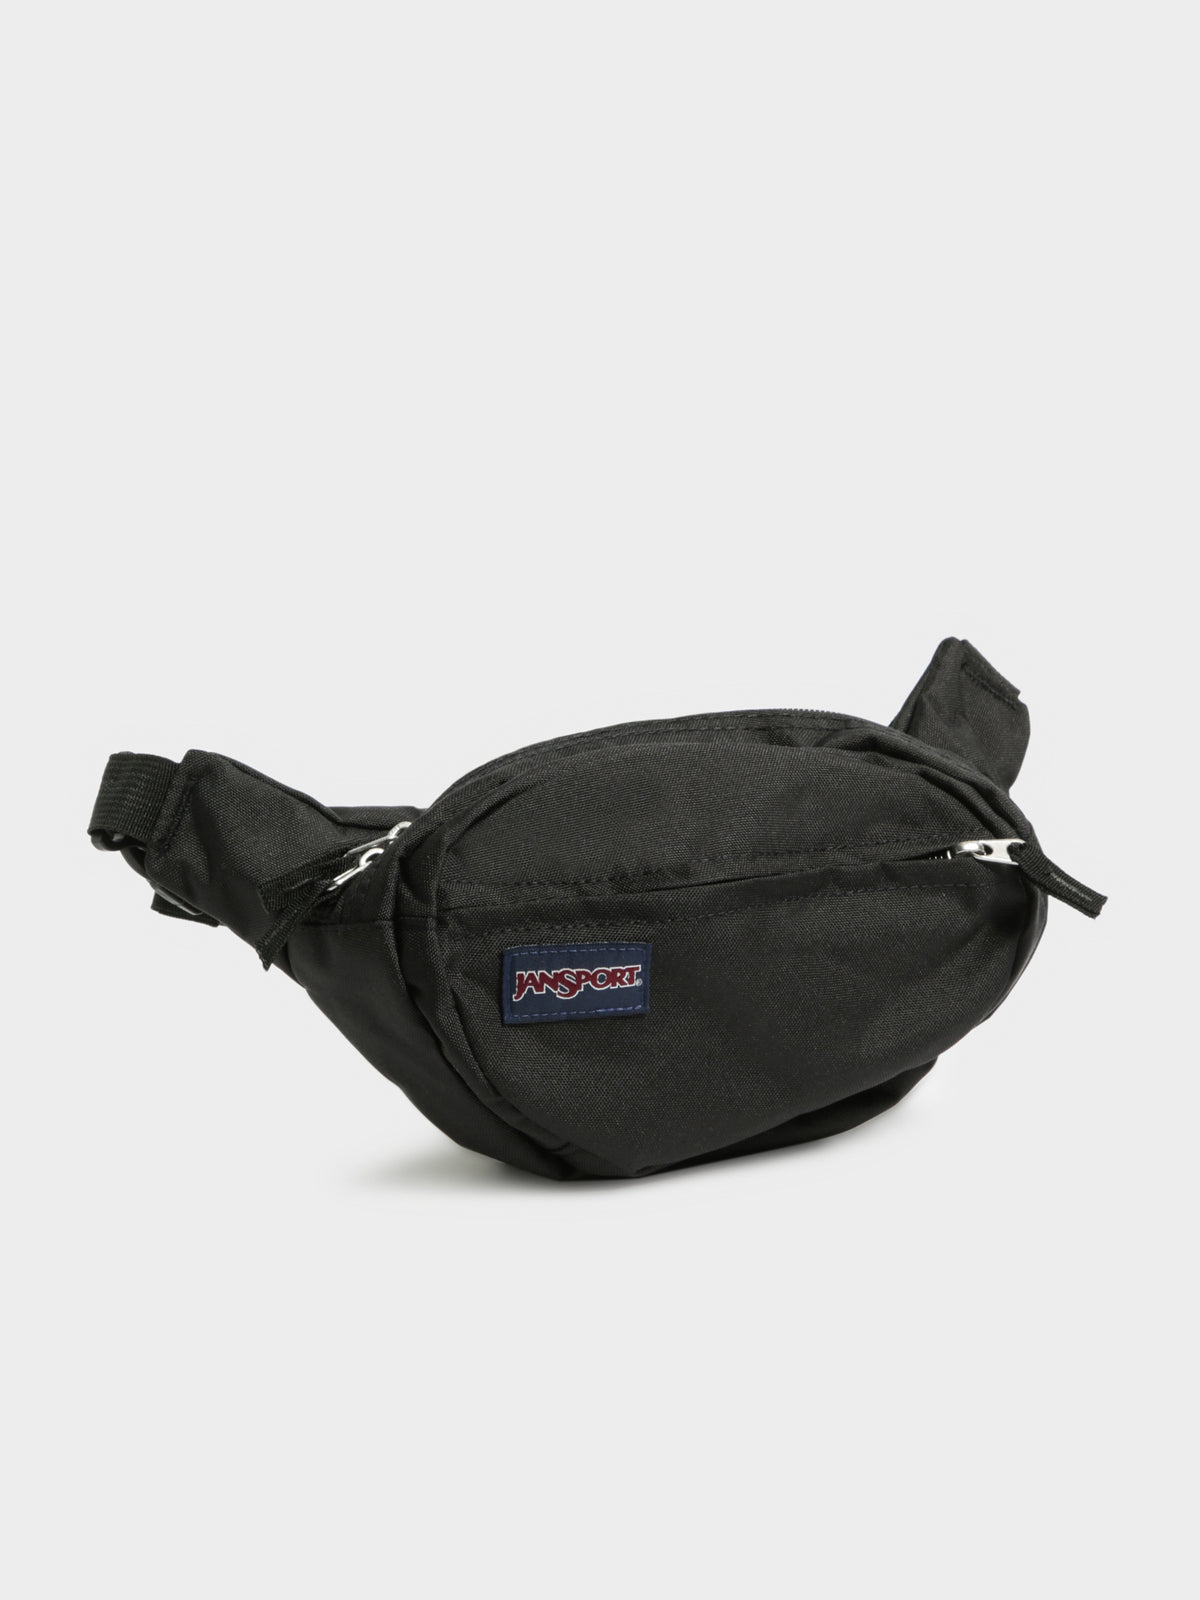 Fifth Avenue Bumbag in Black